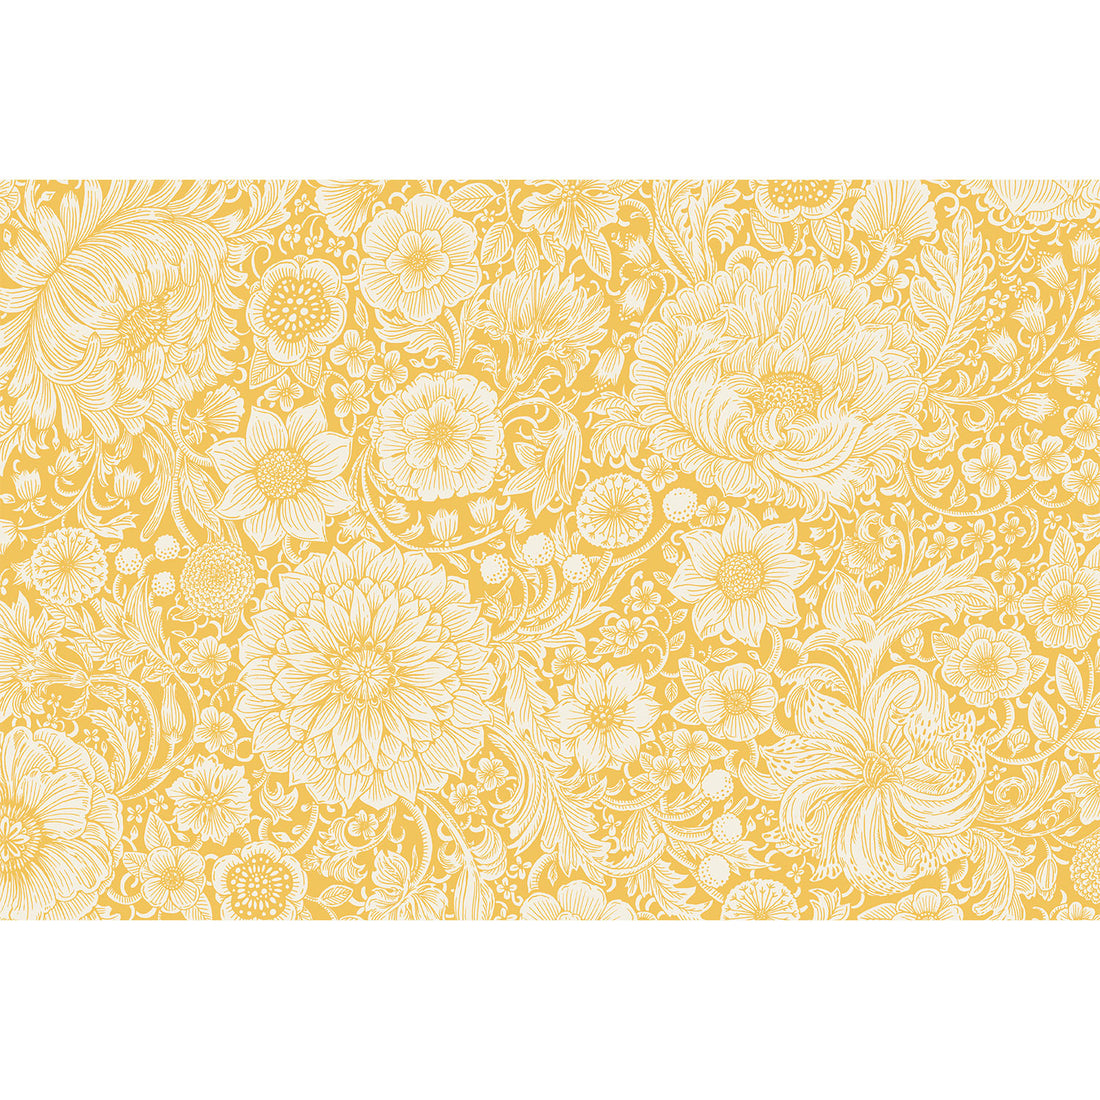 A bohemian-style illustration featuring densely packed white flowers and foliage on a bright yellow background.